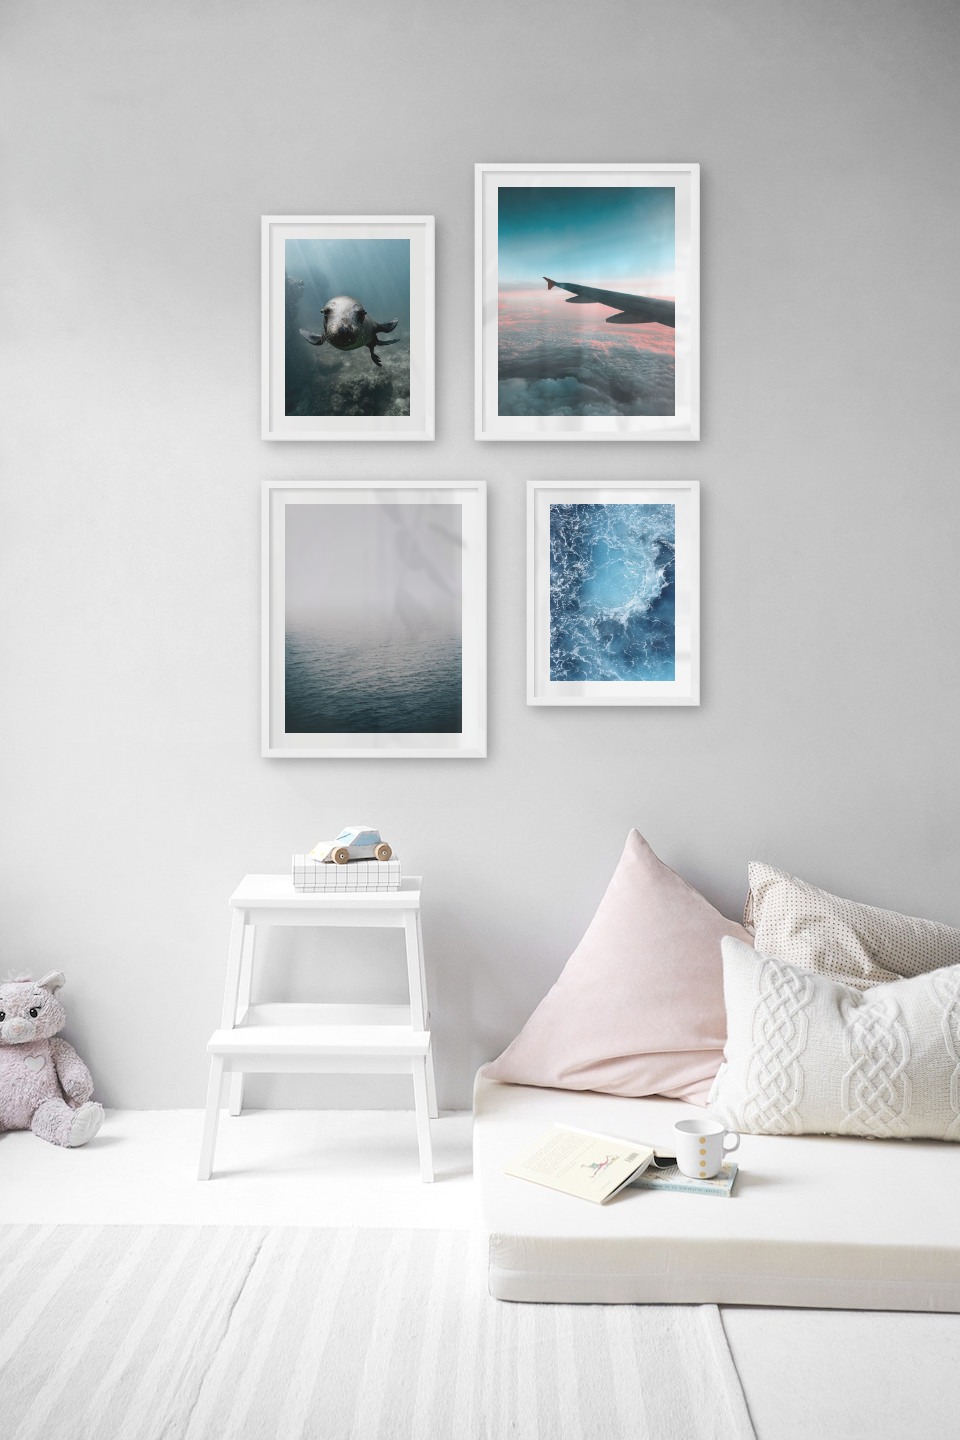 Gallery wall with picture frames in white in sizes 30x40 and 40x50 with prints "Seal in the water", "Above the clouds", "Fog over the sea" and "Sea from above"